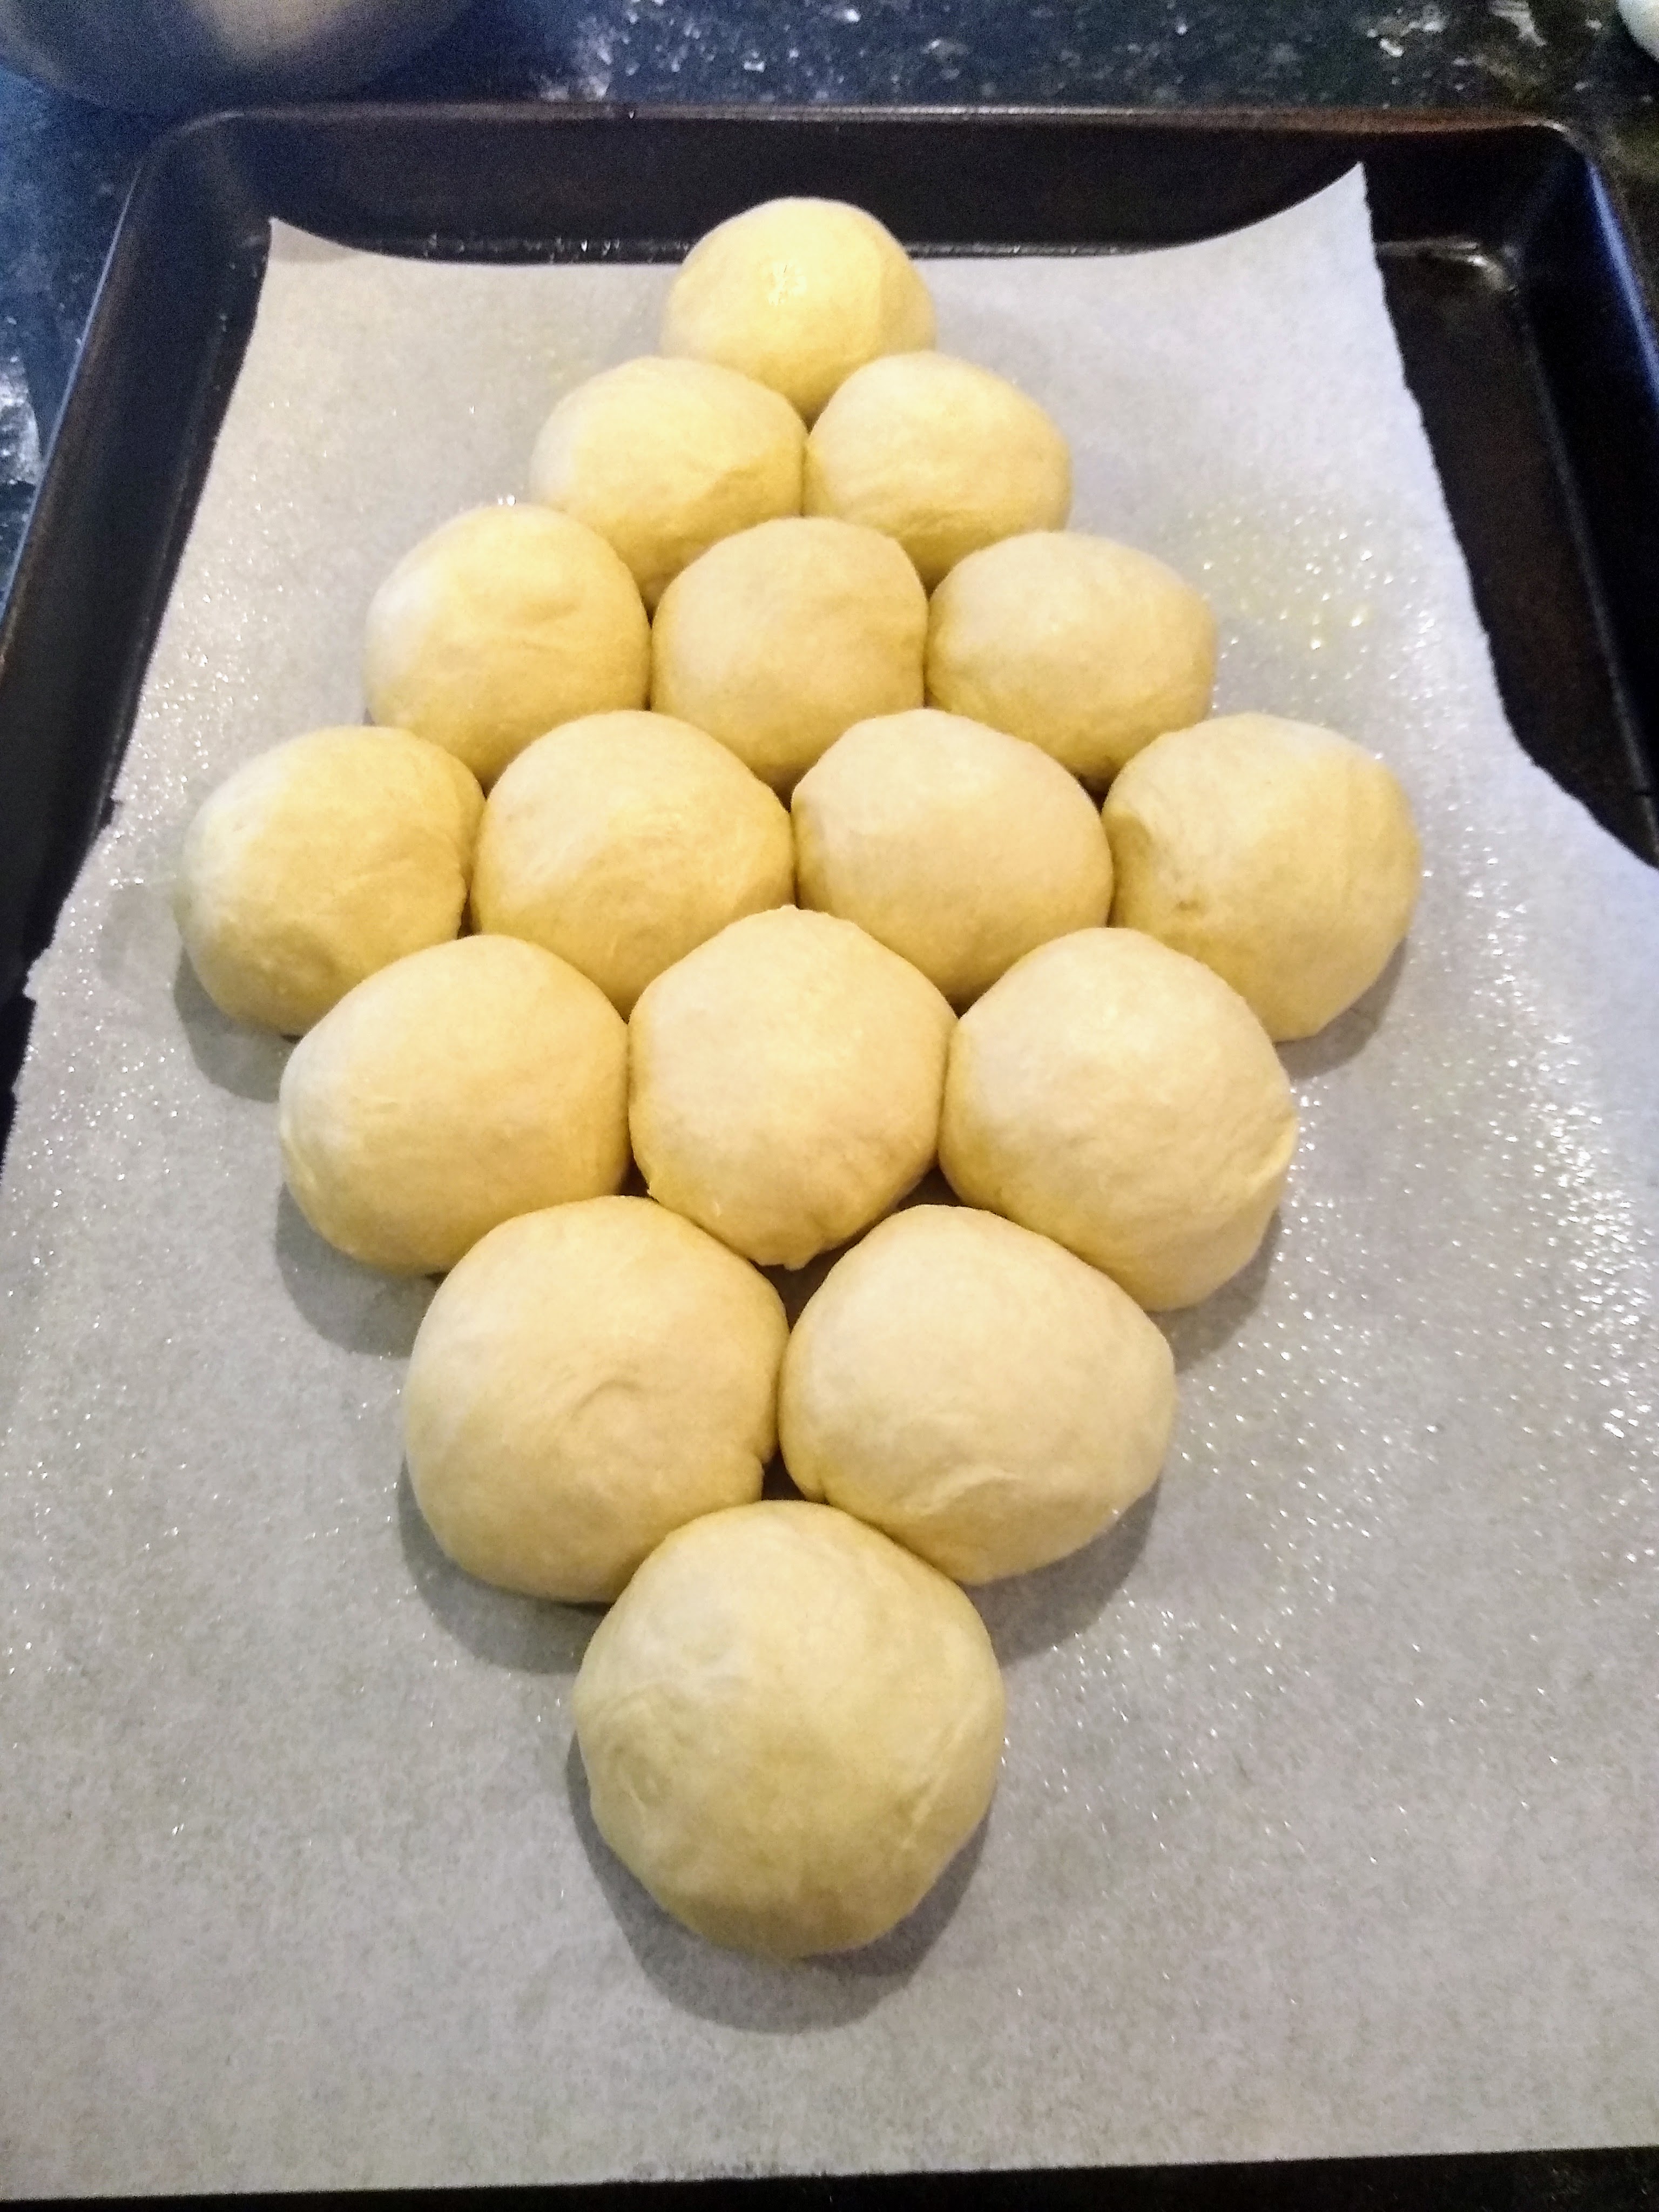 Dinner bread rolls arranged and ready to proof